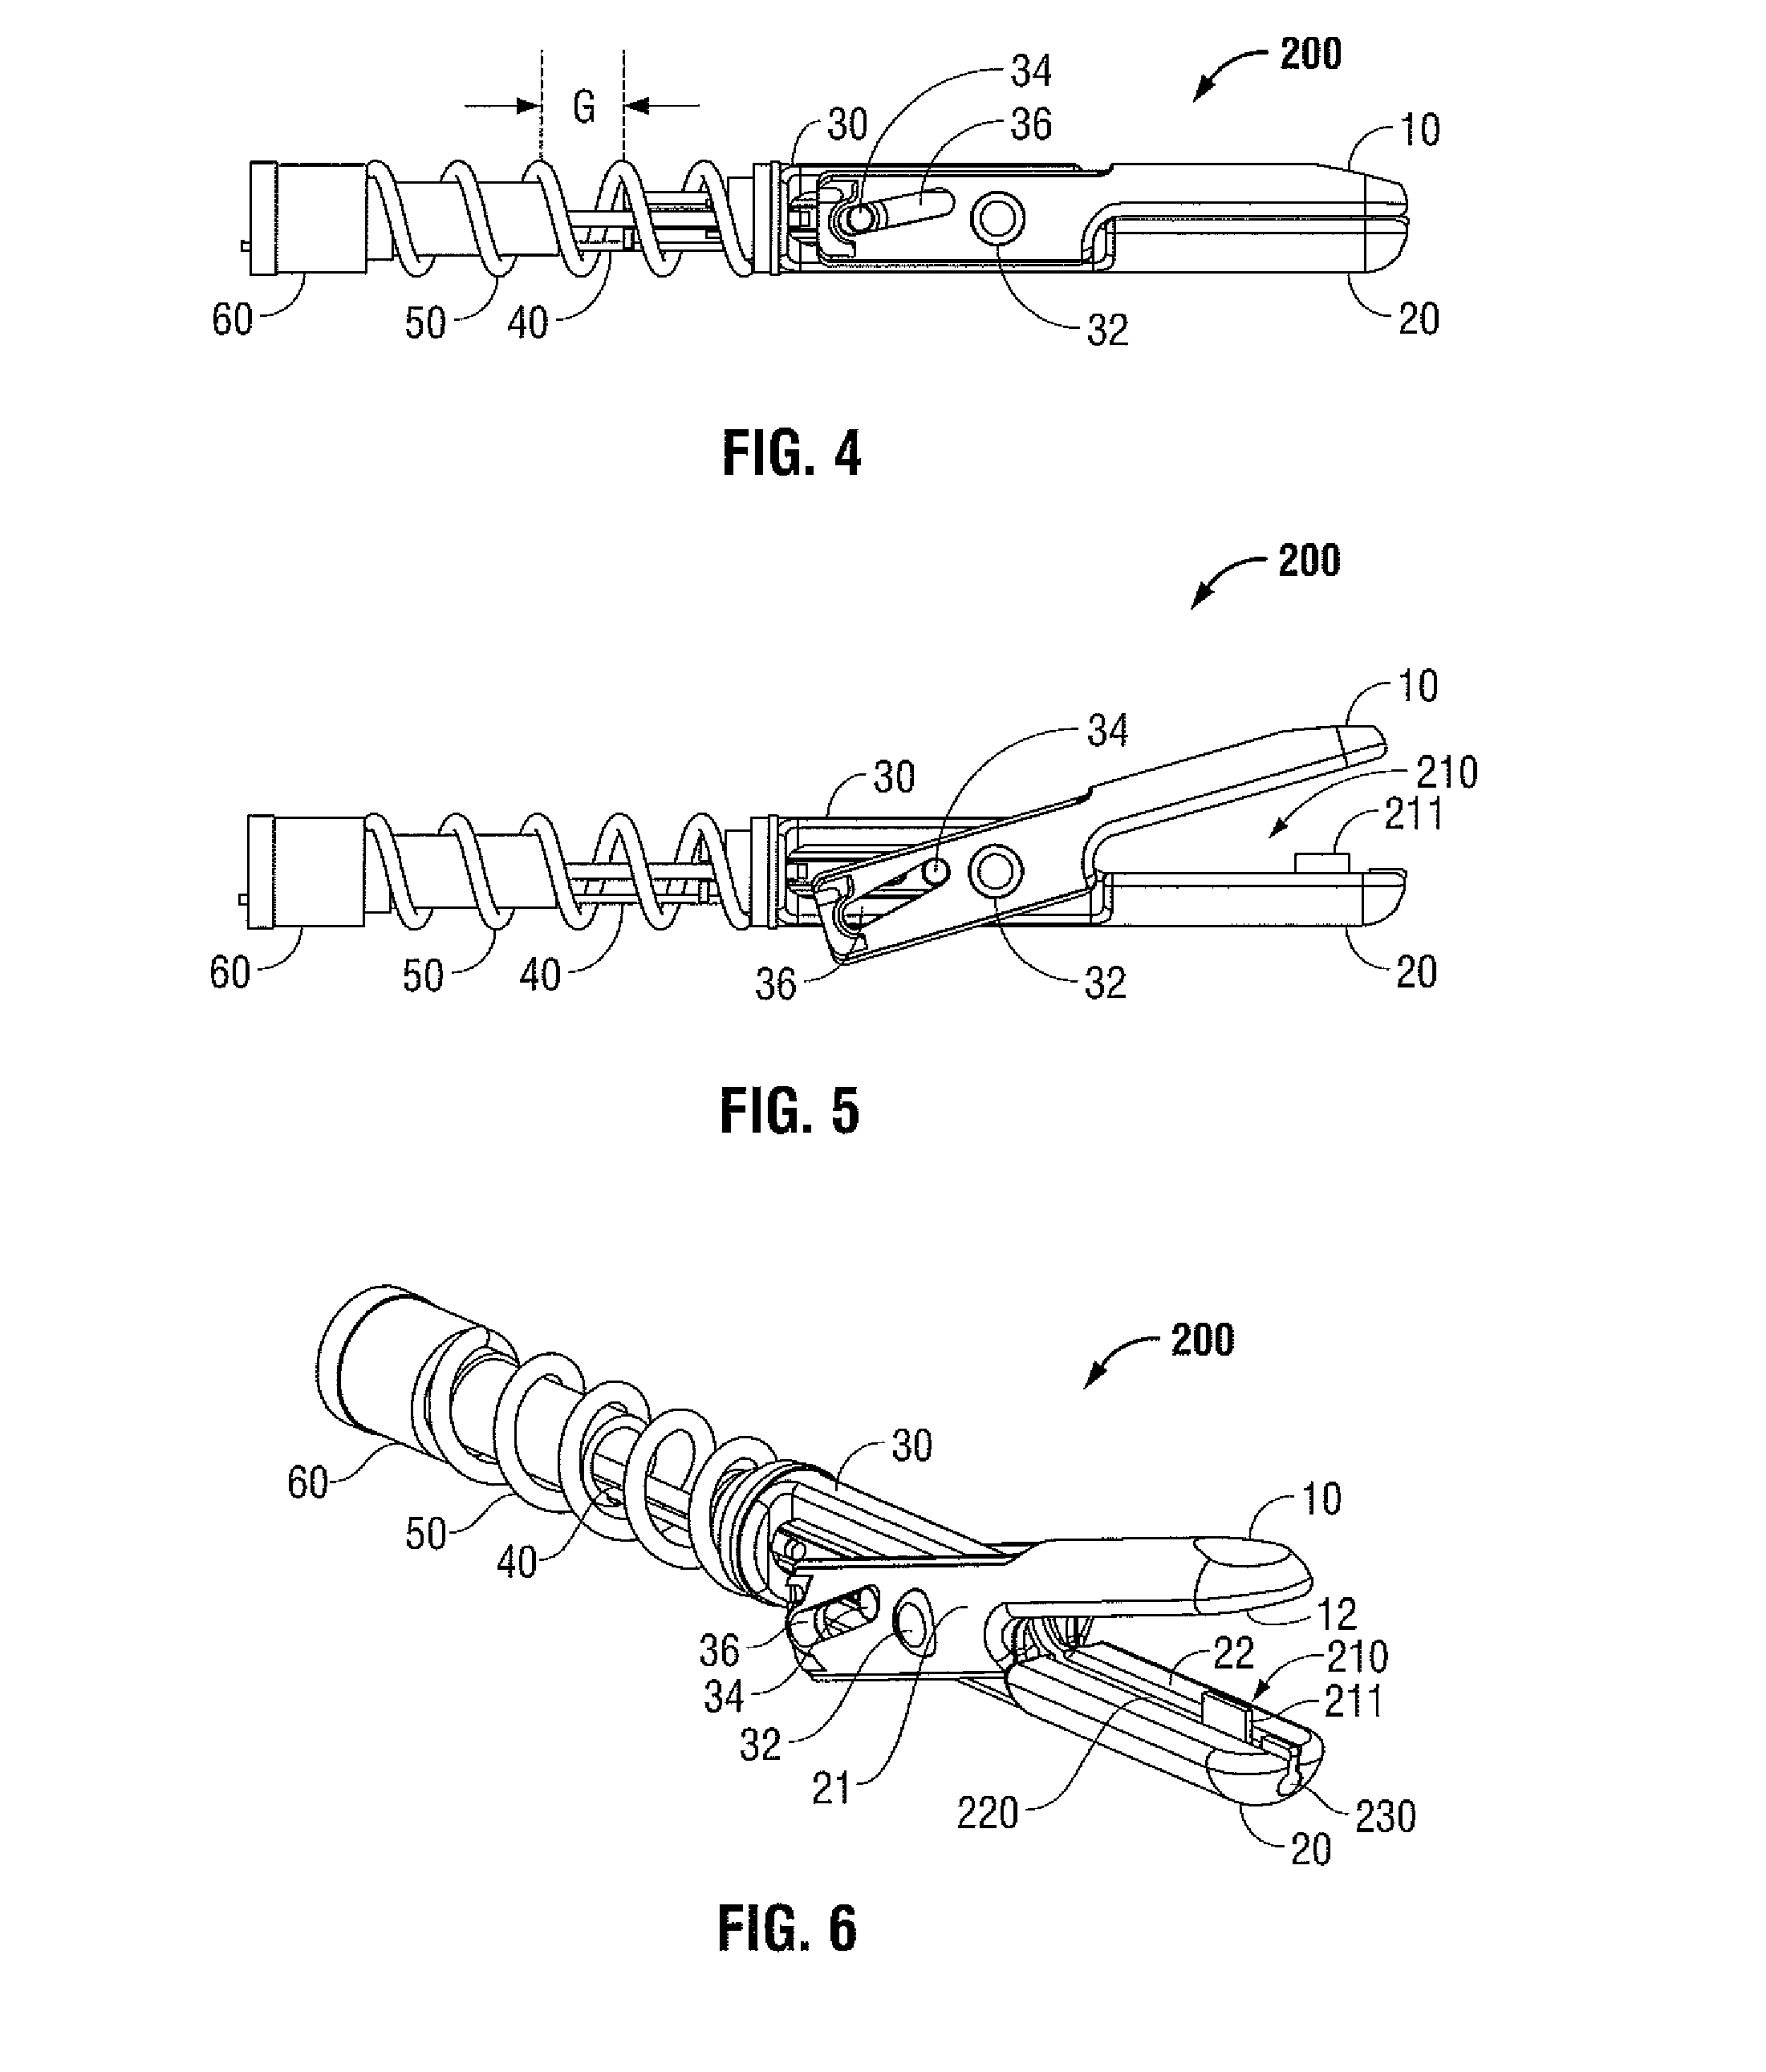 Apparatus For Performing Electrosurgical Procedures Having A Spring Mechanism Associated With The Jaw Members